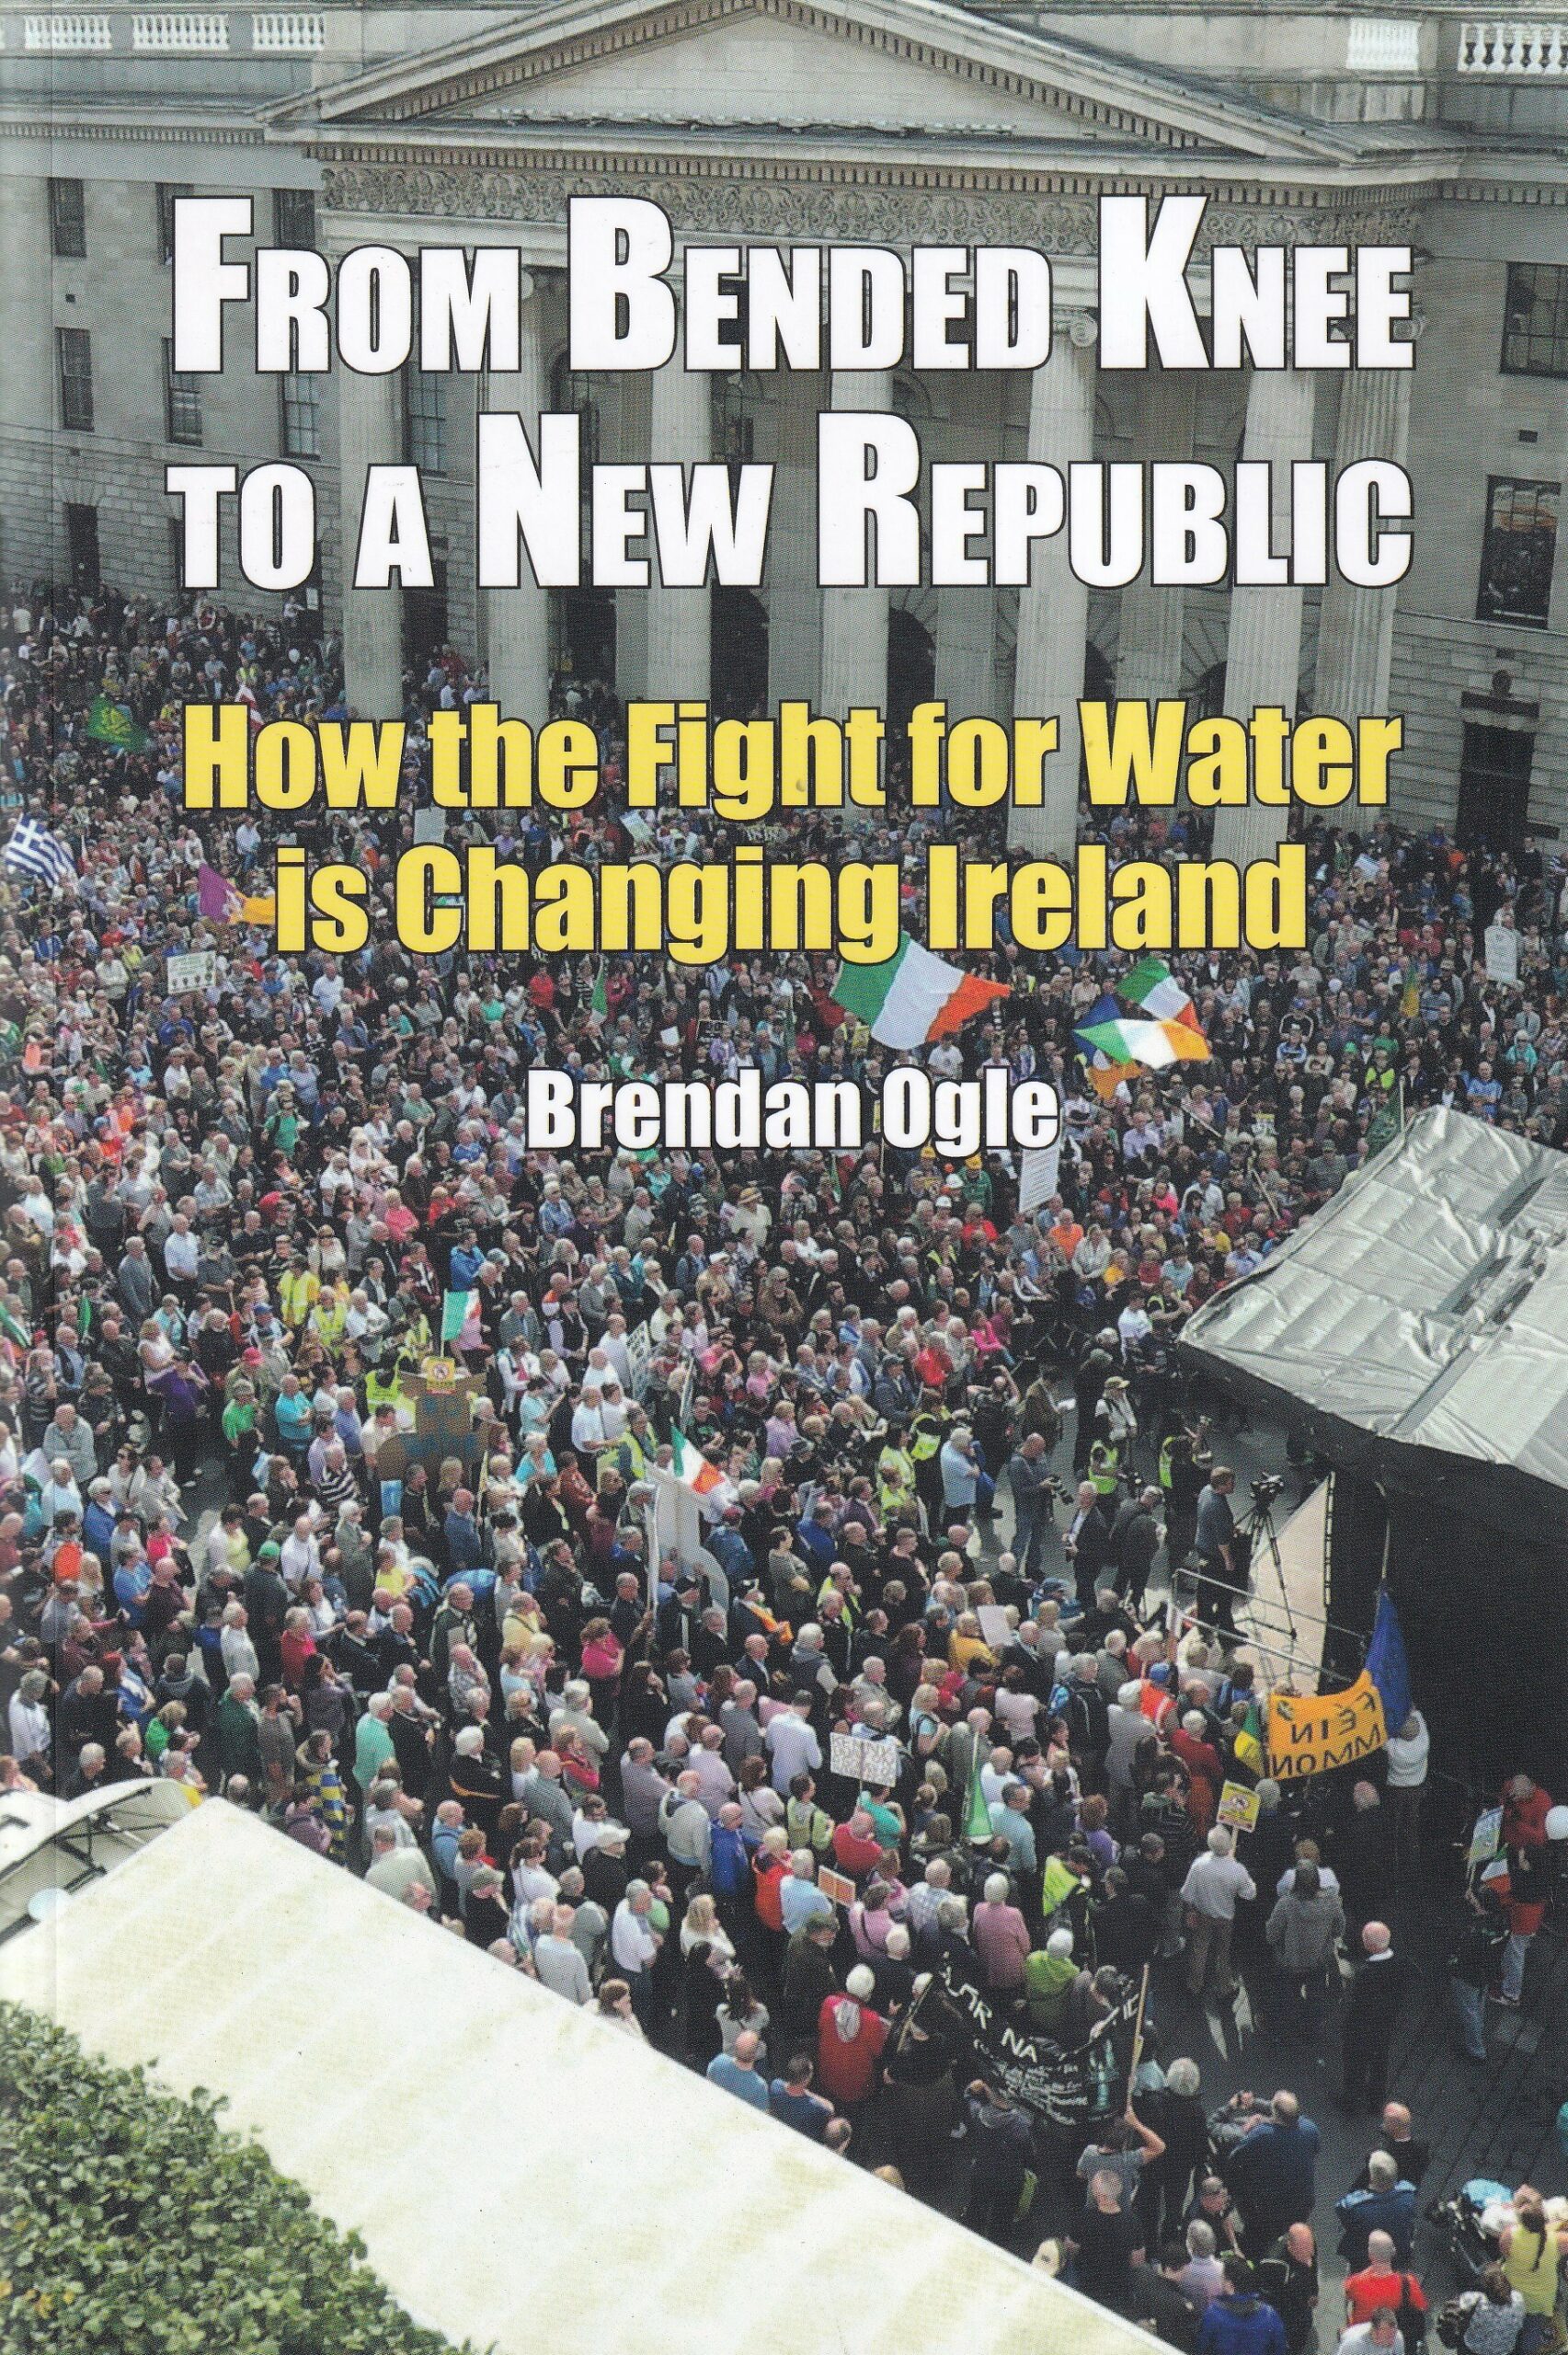 From Bended Knee to a New Republic: How the Fight for Water is Changing Ireland by Brendan Ogle